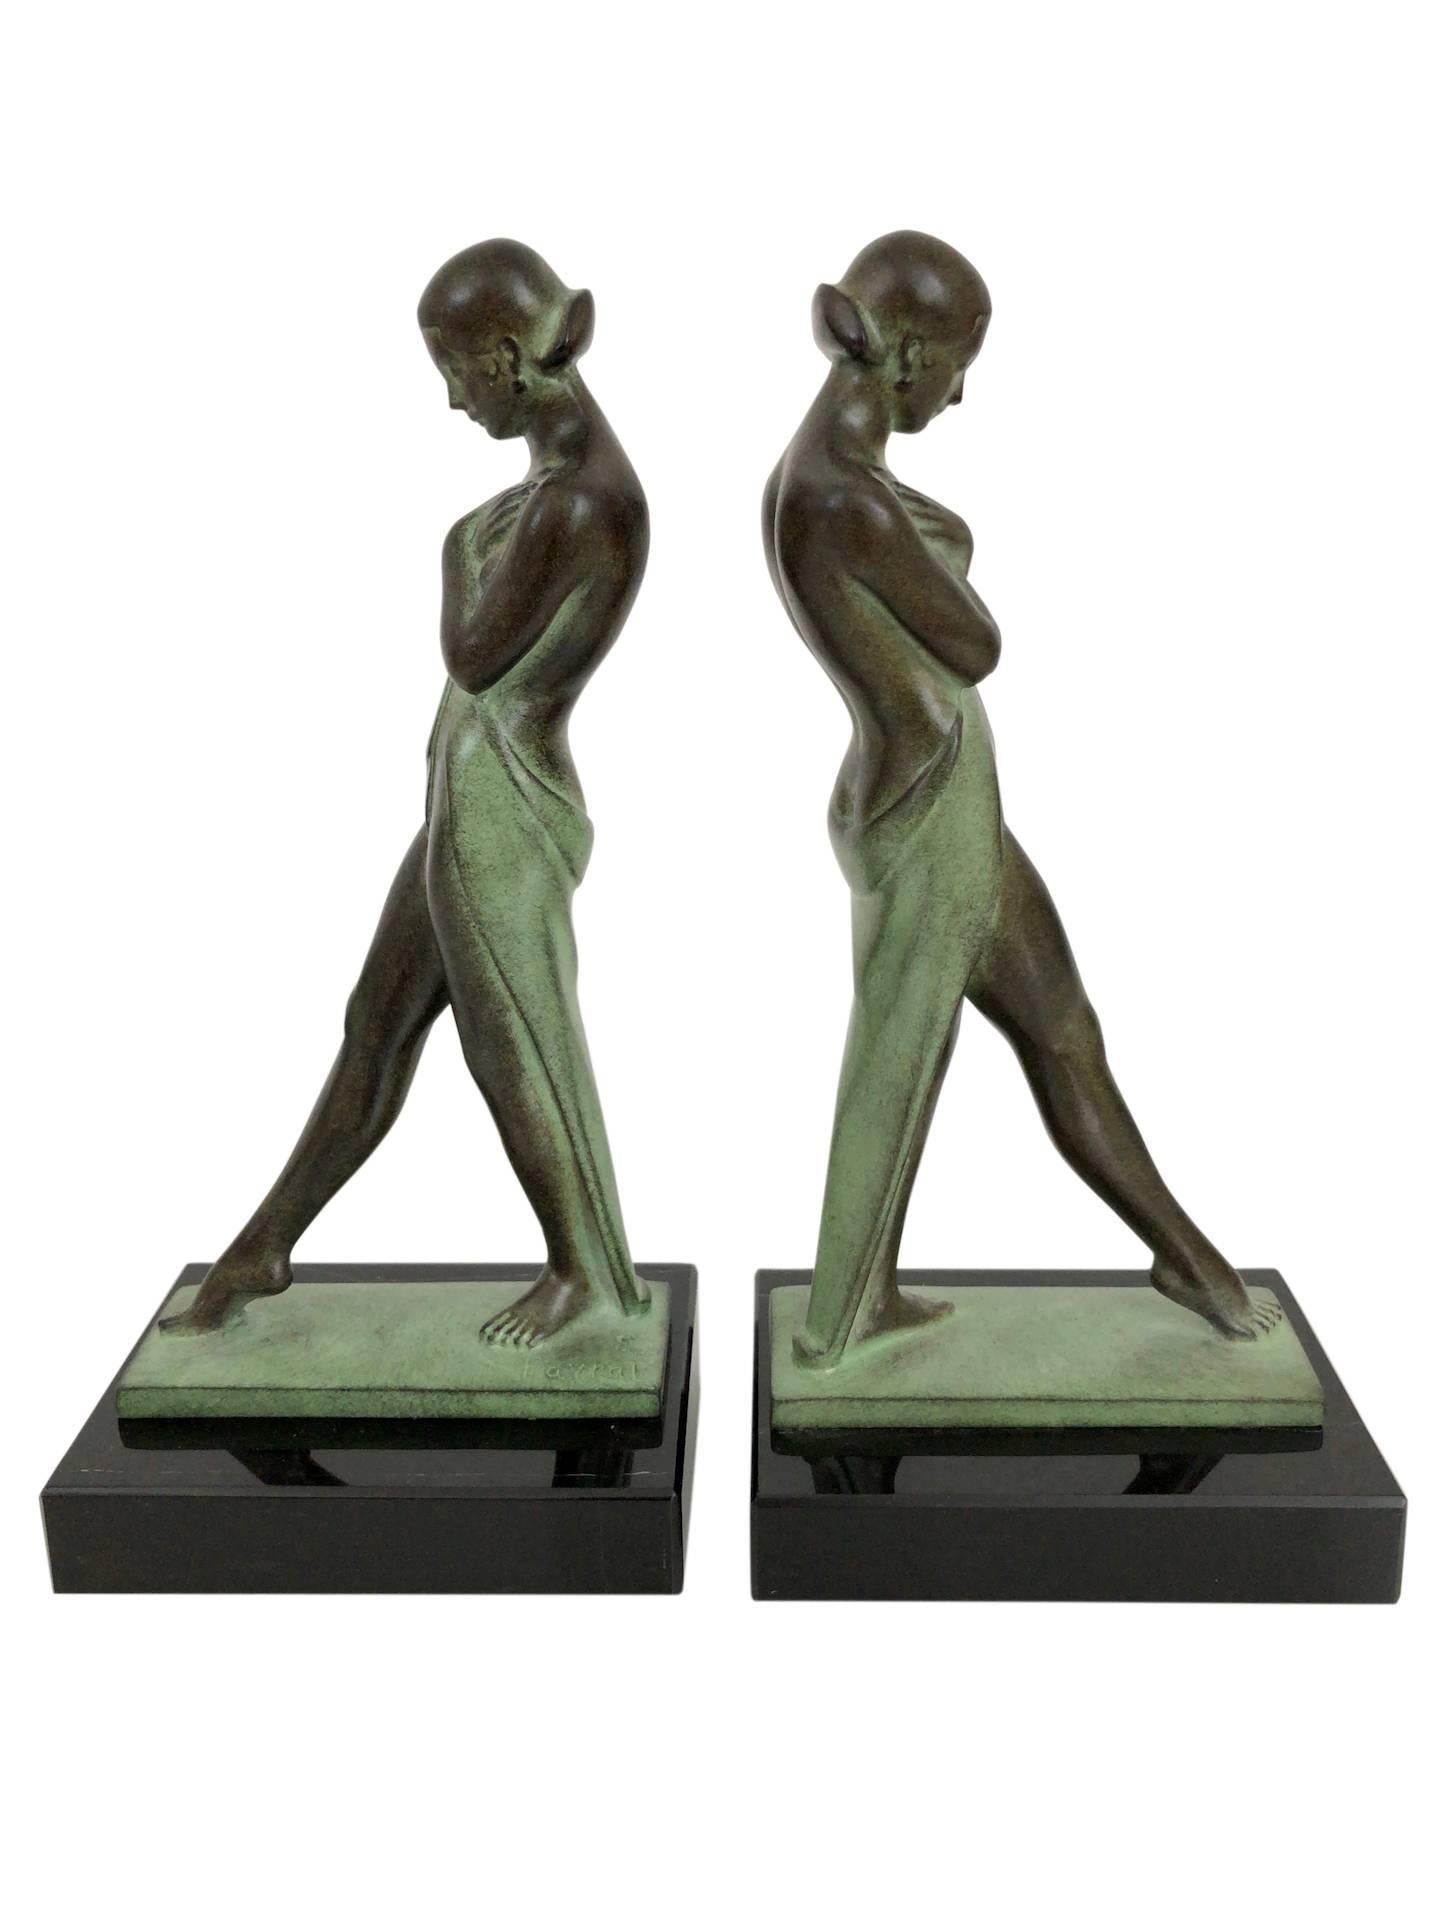 “Meditation”
Designed in France during the roaring 1920s by “Fayral”, which is one of the pseudonymes from “Pierre Le Faguays” (1892-1962), signed
Original “Max Le Verrier”
Art Deco style, France 

Bookends made in “Régule” (spelter)
Socle in